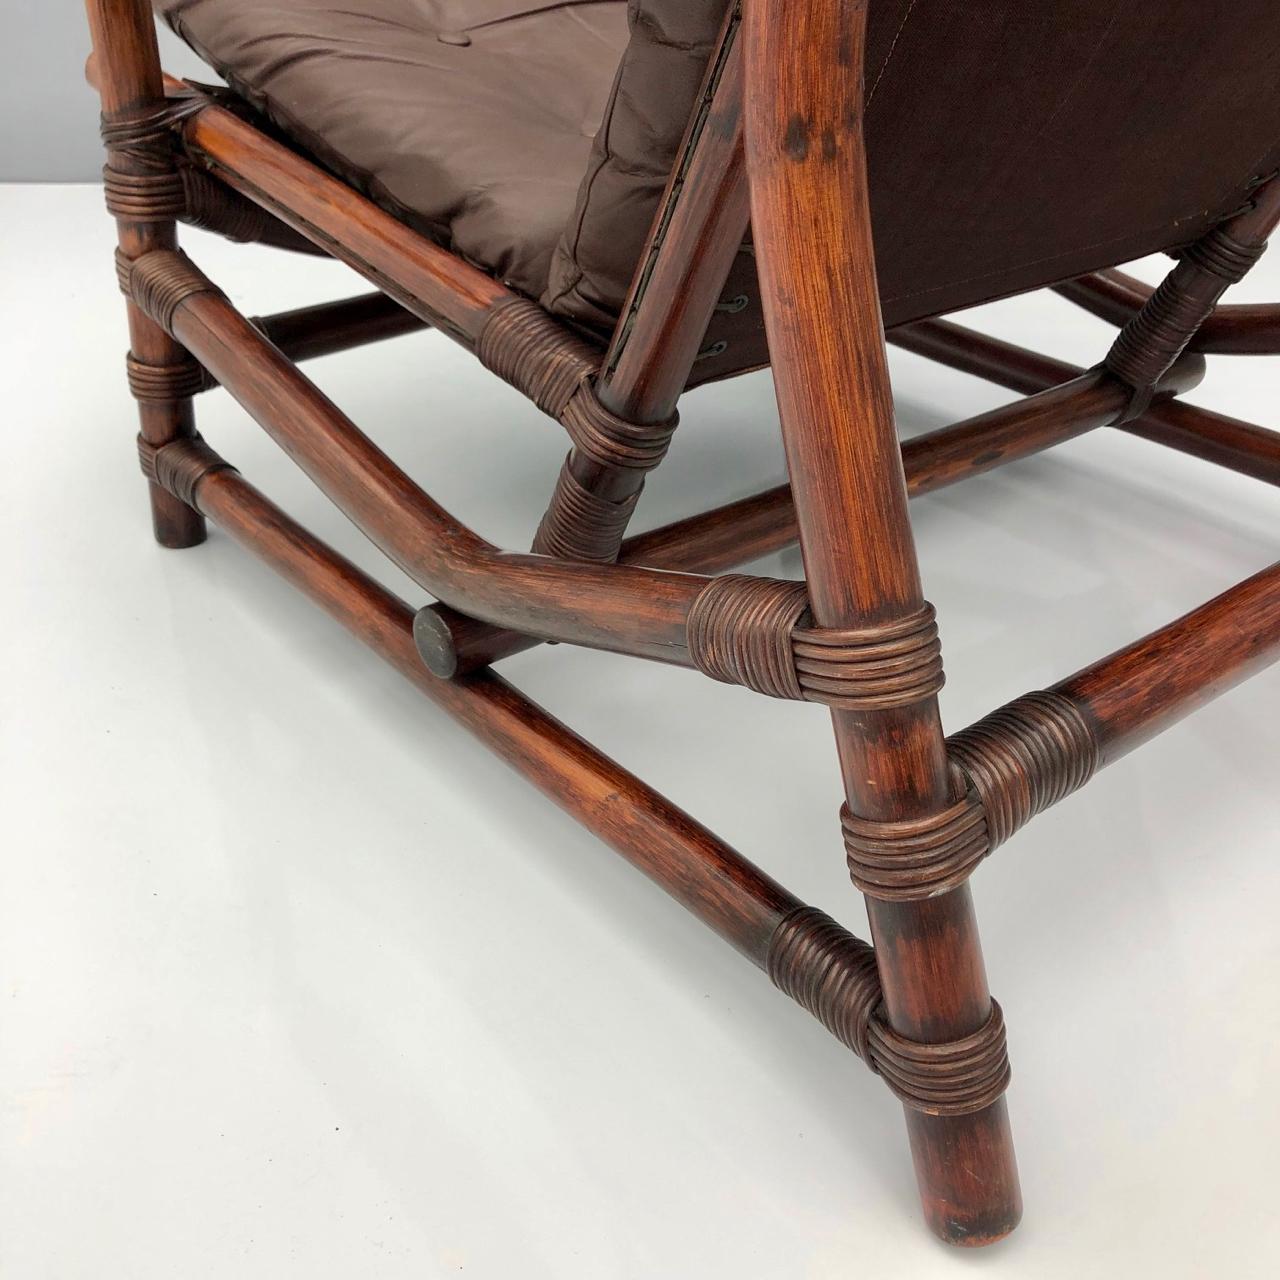 European Leather Bamboo Lounge Chair with a Table, 1960s For Sale